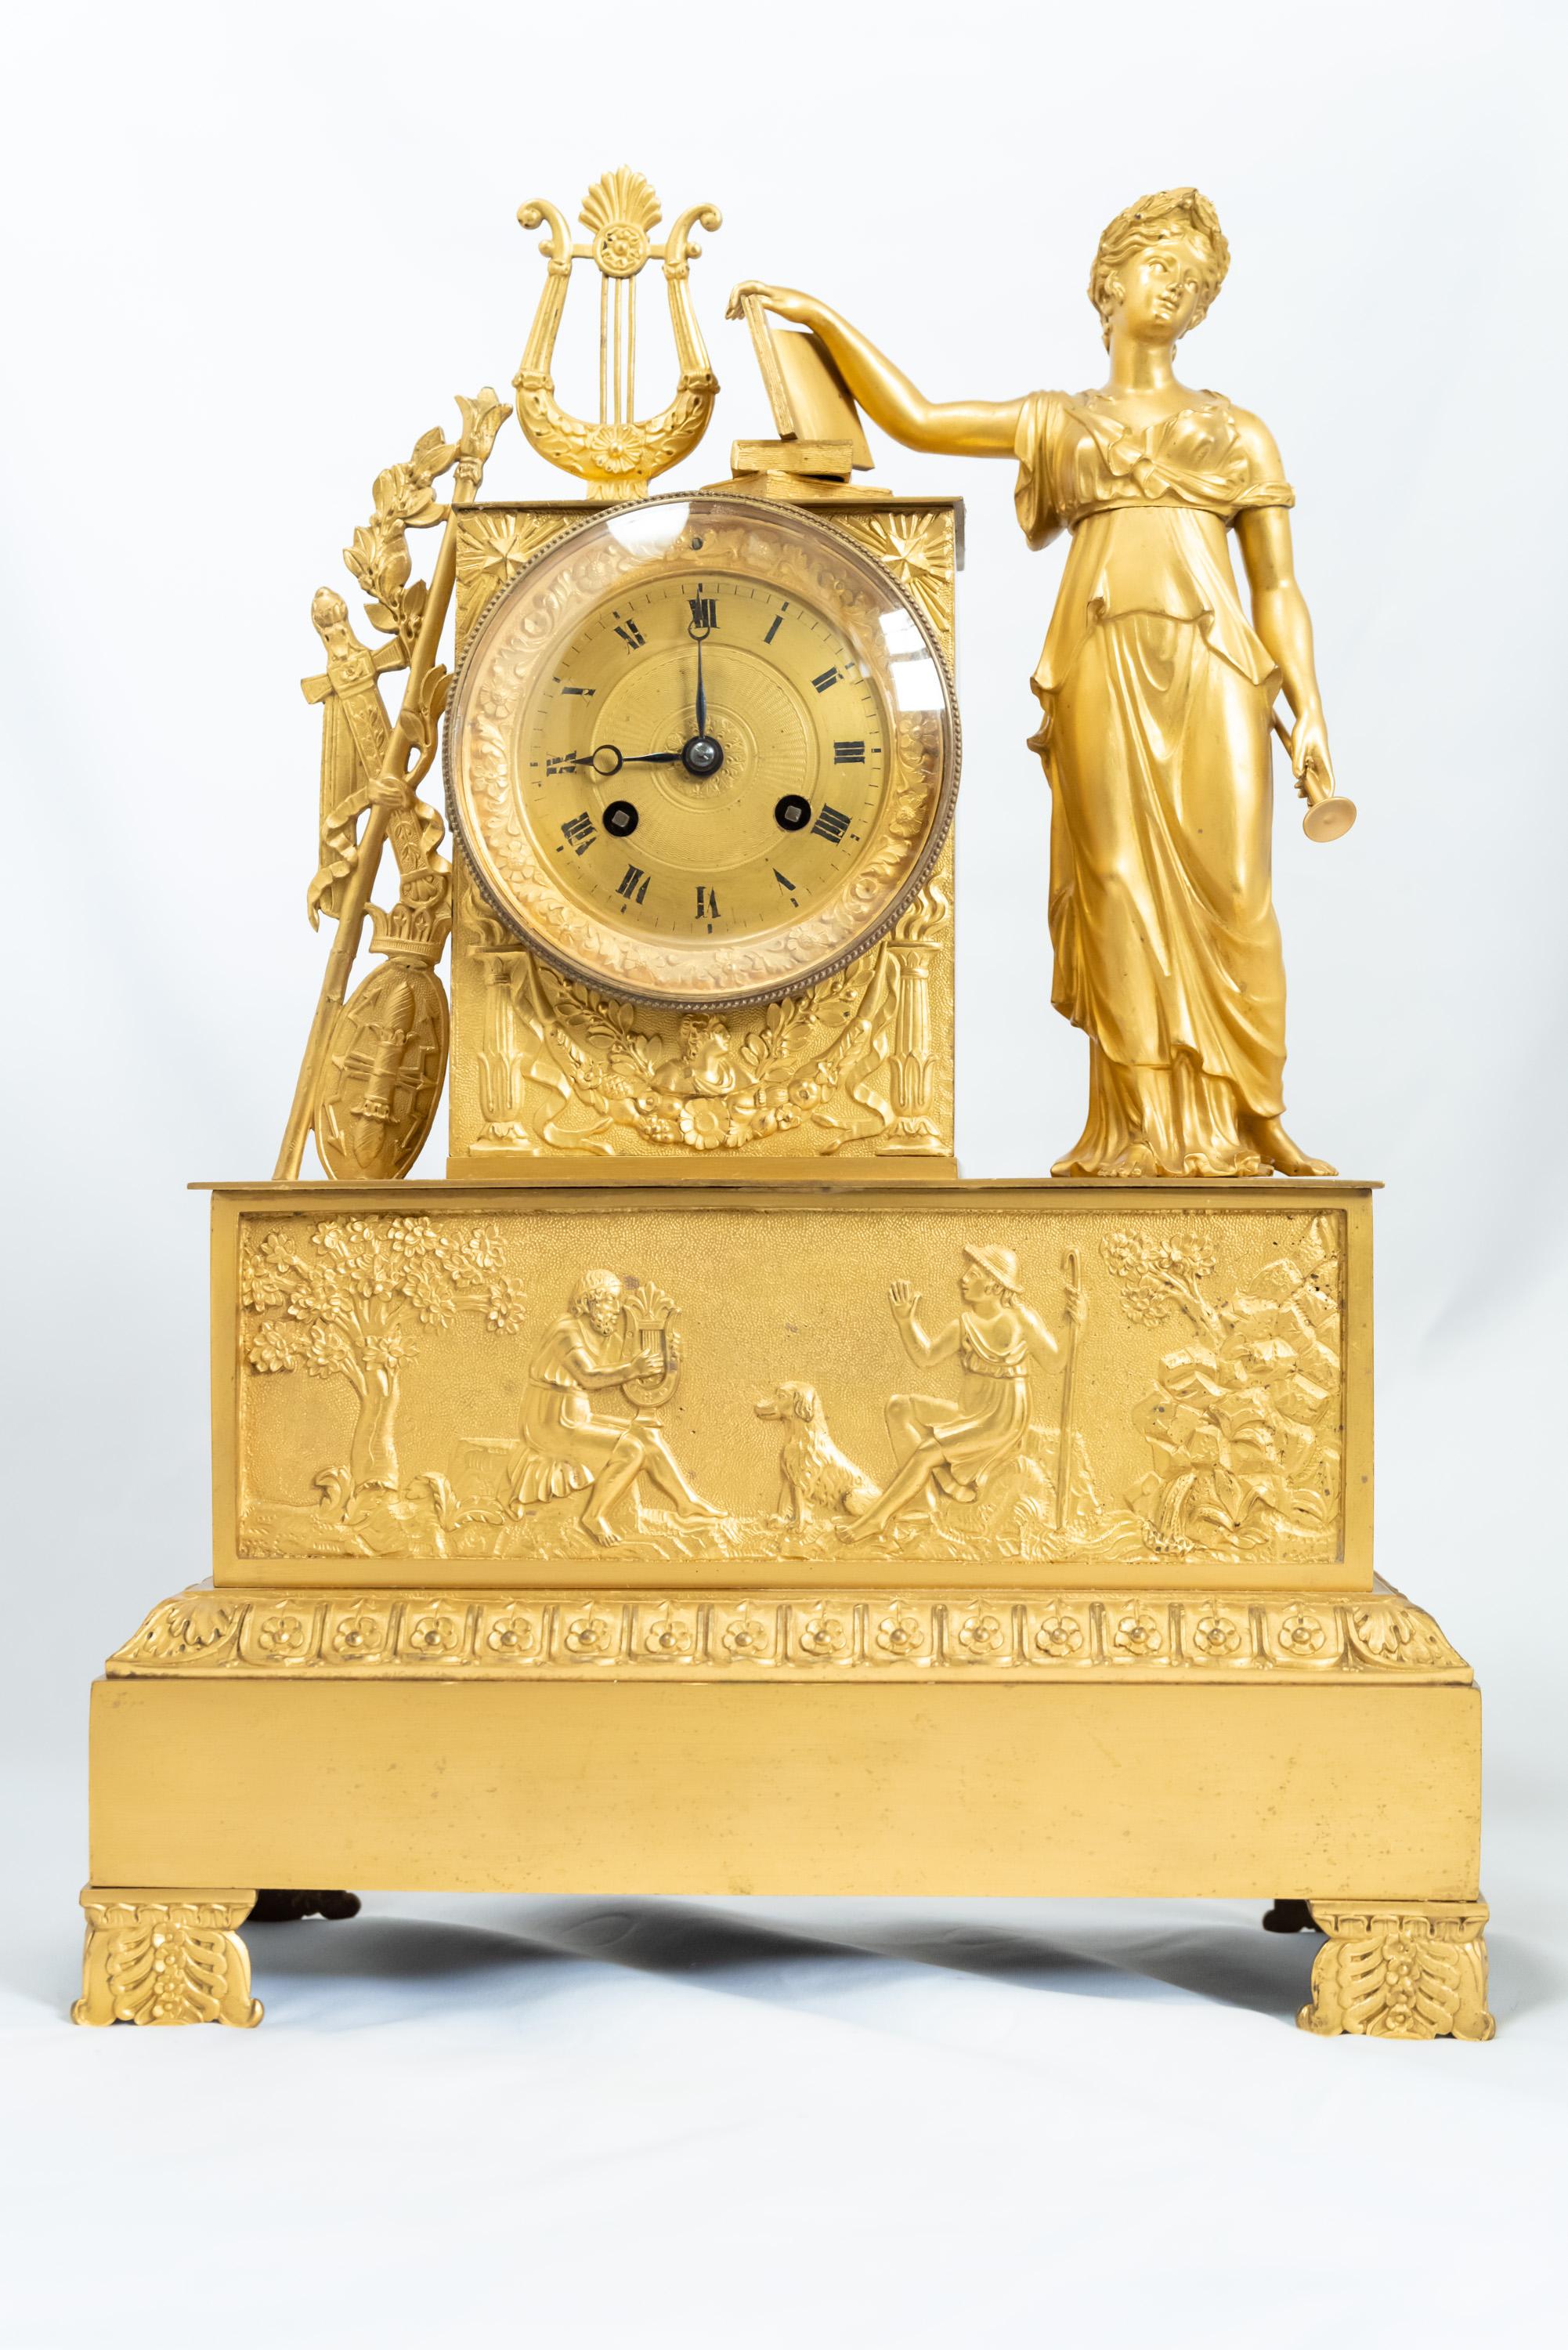 Bronze A Restauration Era Fire-Gilt Mantle Clock with Figures of Venus and Cupid For Sale